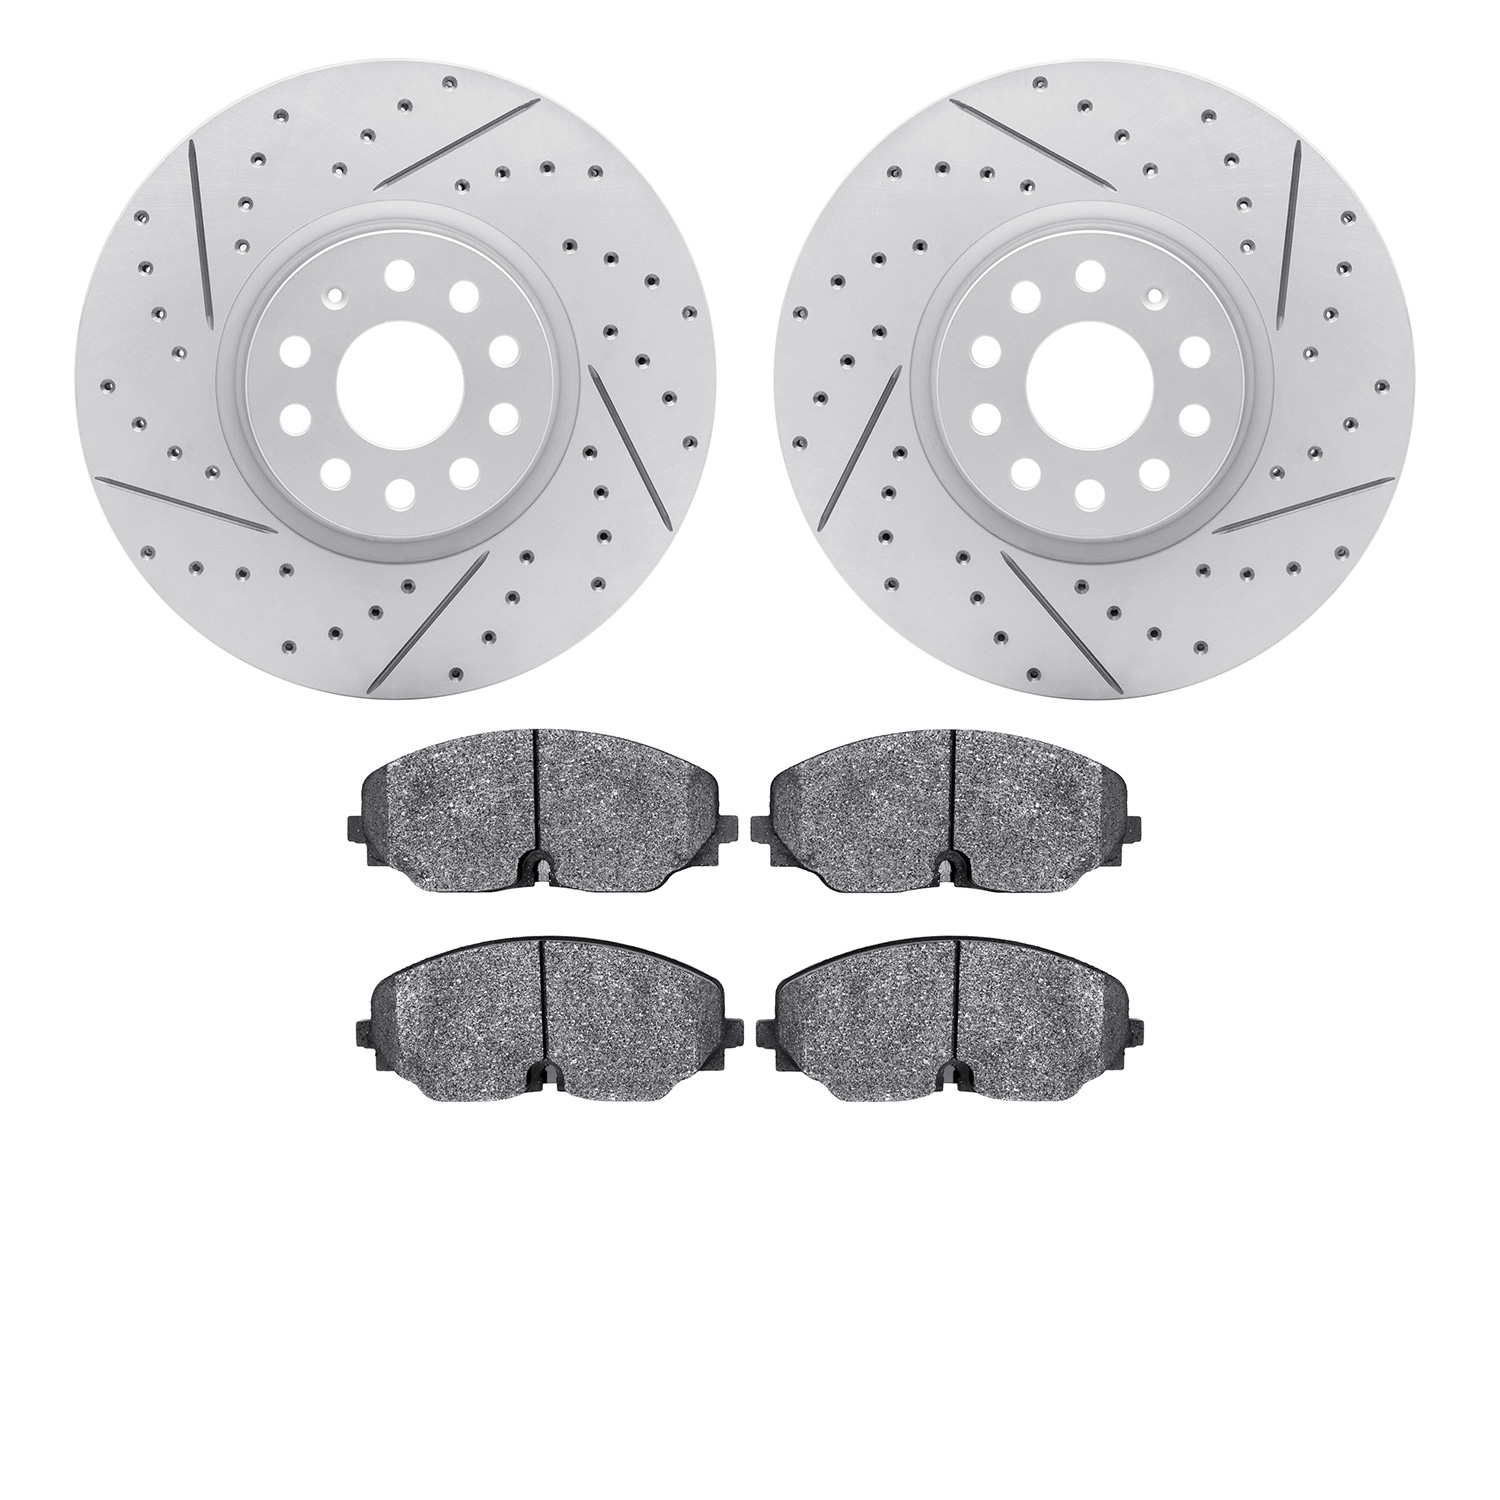 2602-74147 Geoperformance Drilled/Slotted Rotors w/5000 Euro Ceramic Brake Pads Kit, Fits Select Audi/Volkswagen, Position: Fron